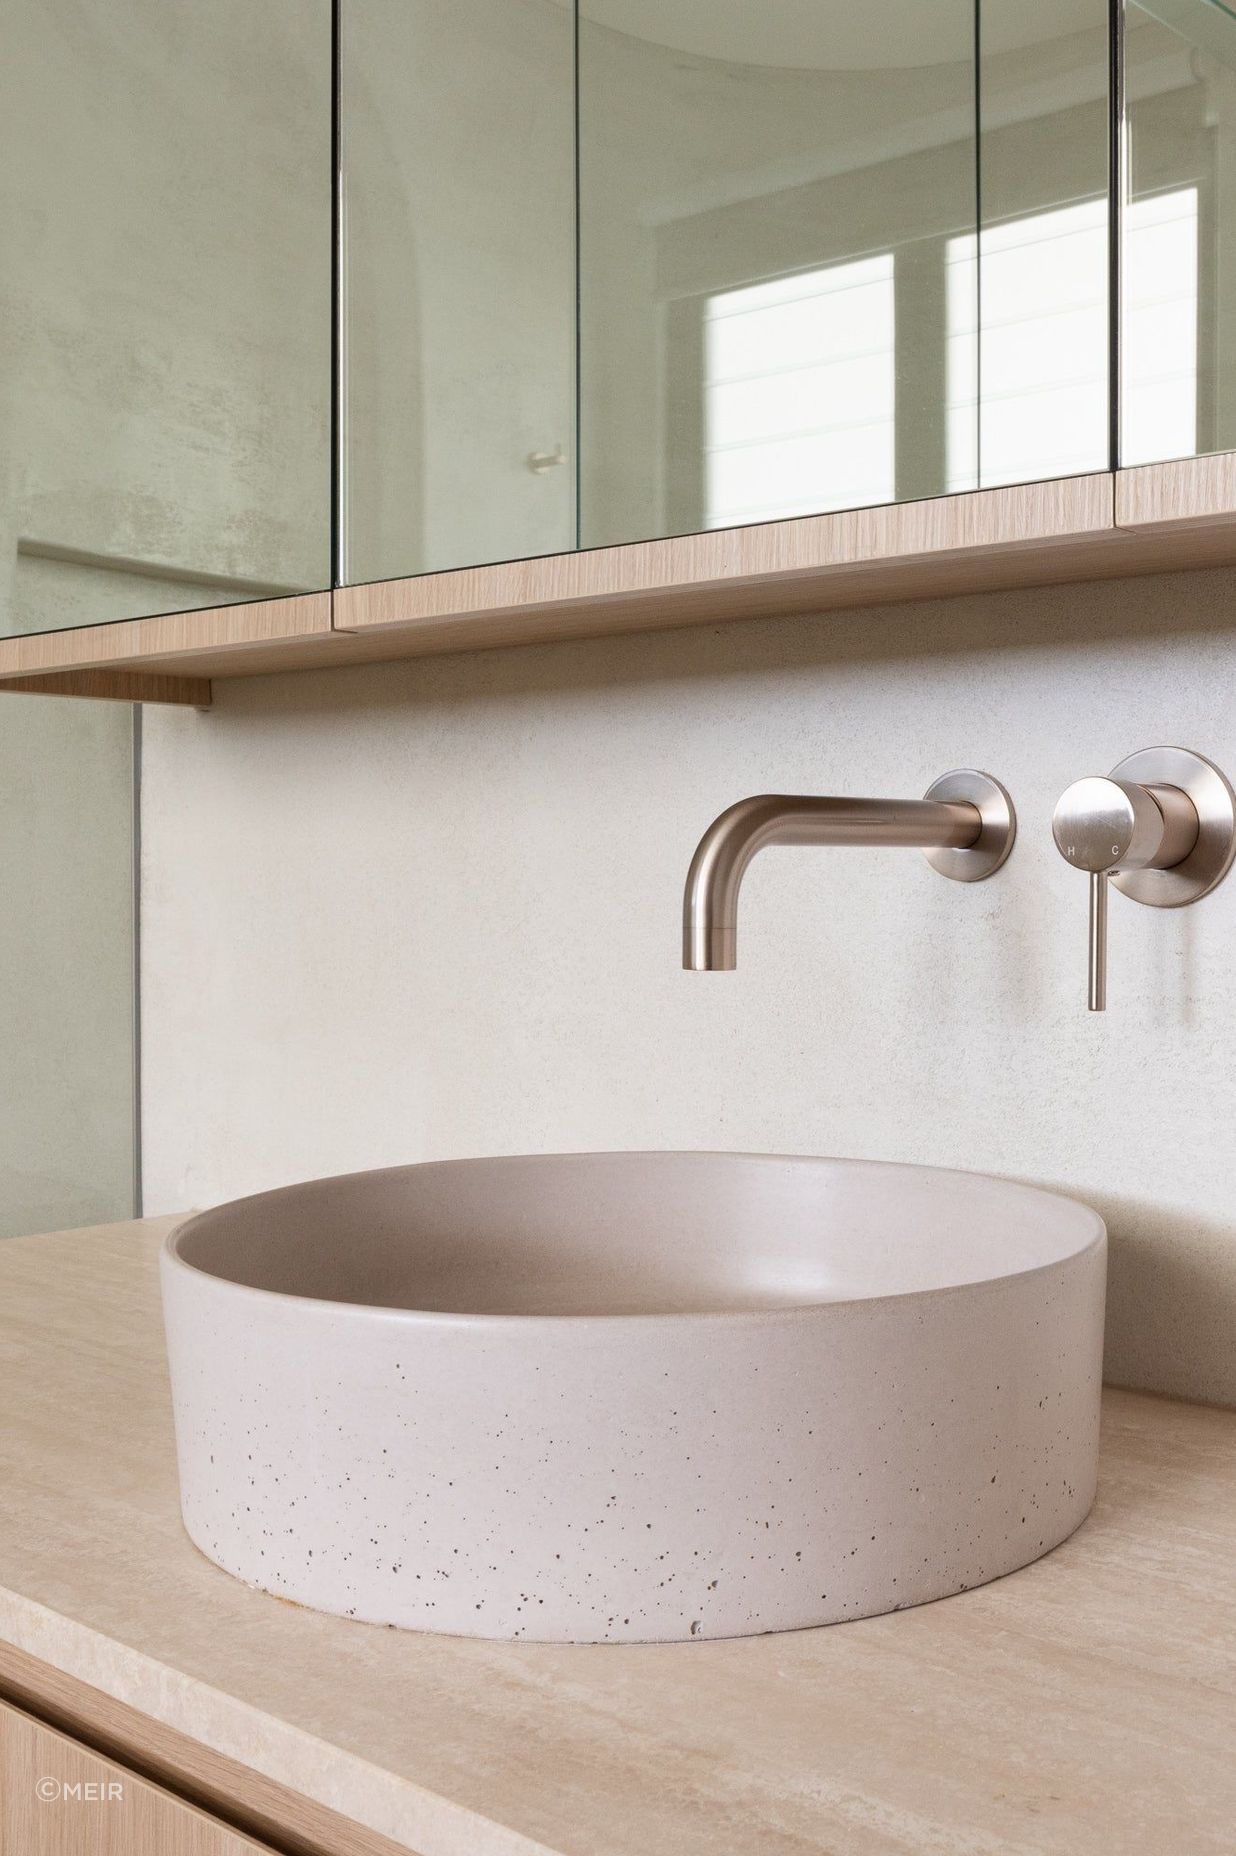 Wall-mounted taps fixed directly to the wall offer more space around the basin.